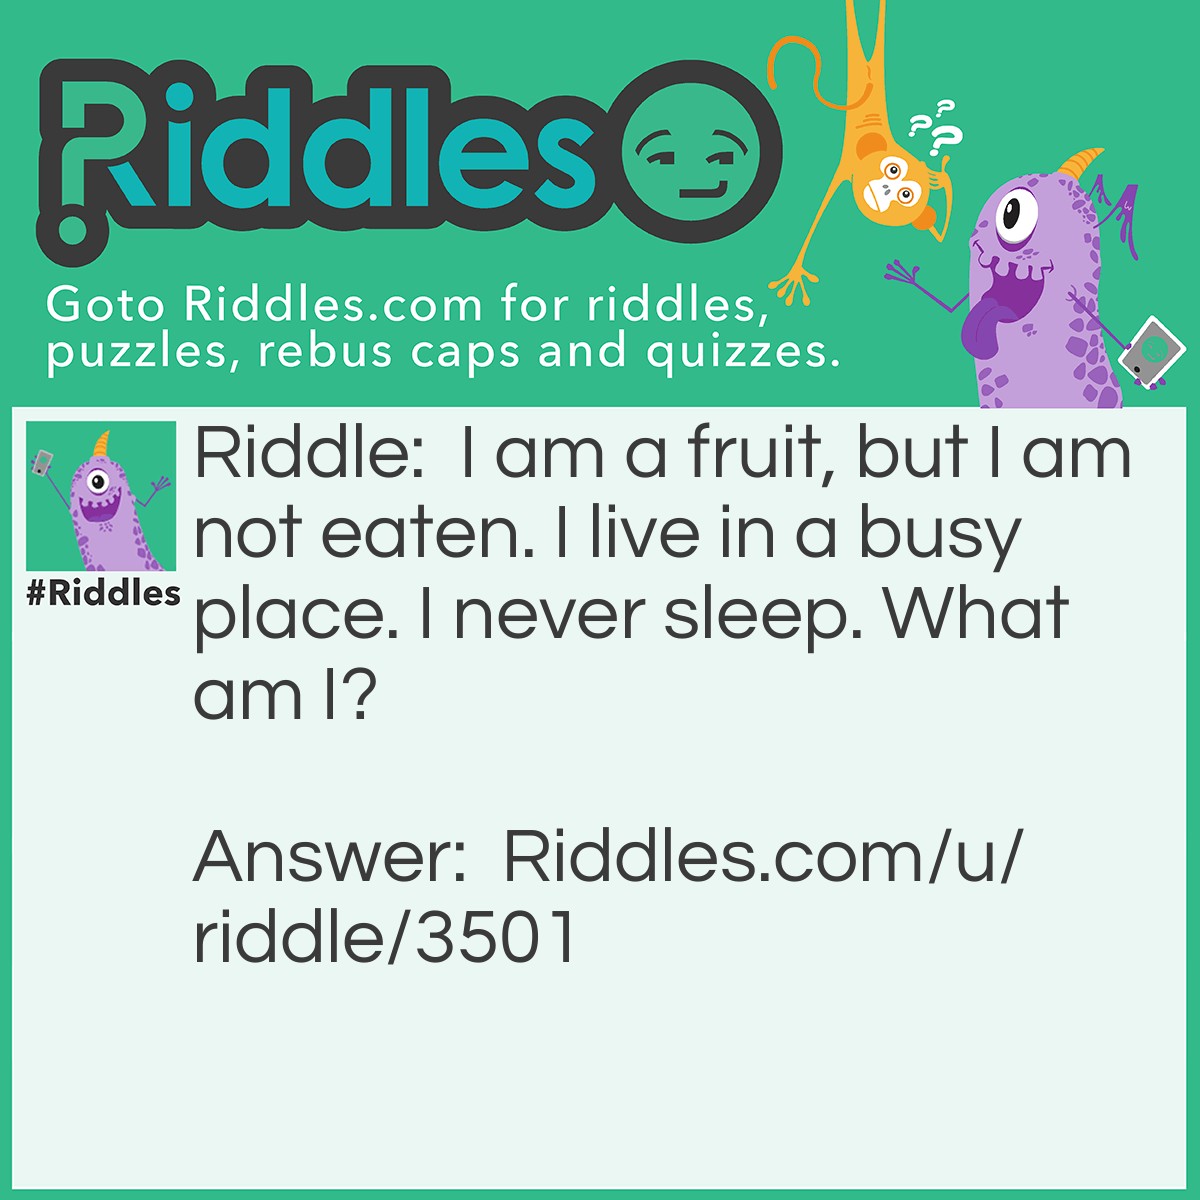 Riddle: I am a fruit, but I am not eaten. I live in a busy place. I never sleep. What am I? Answer: The big Apple!